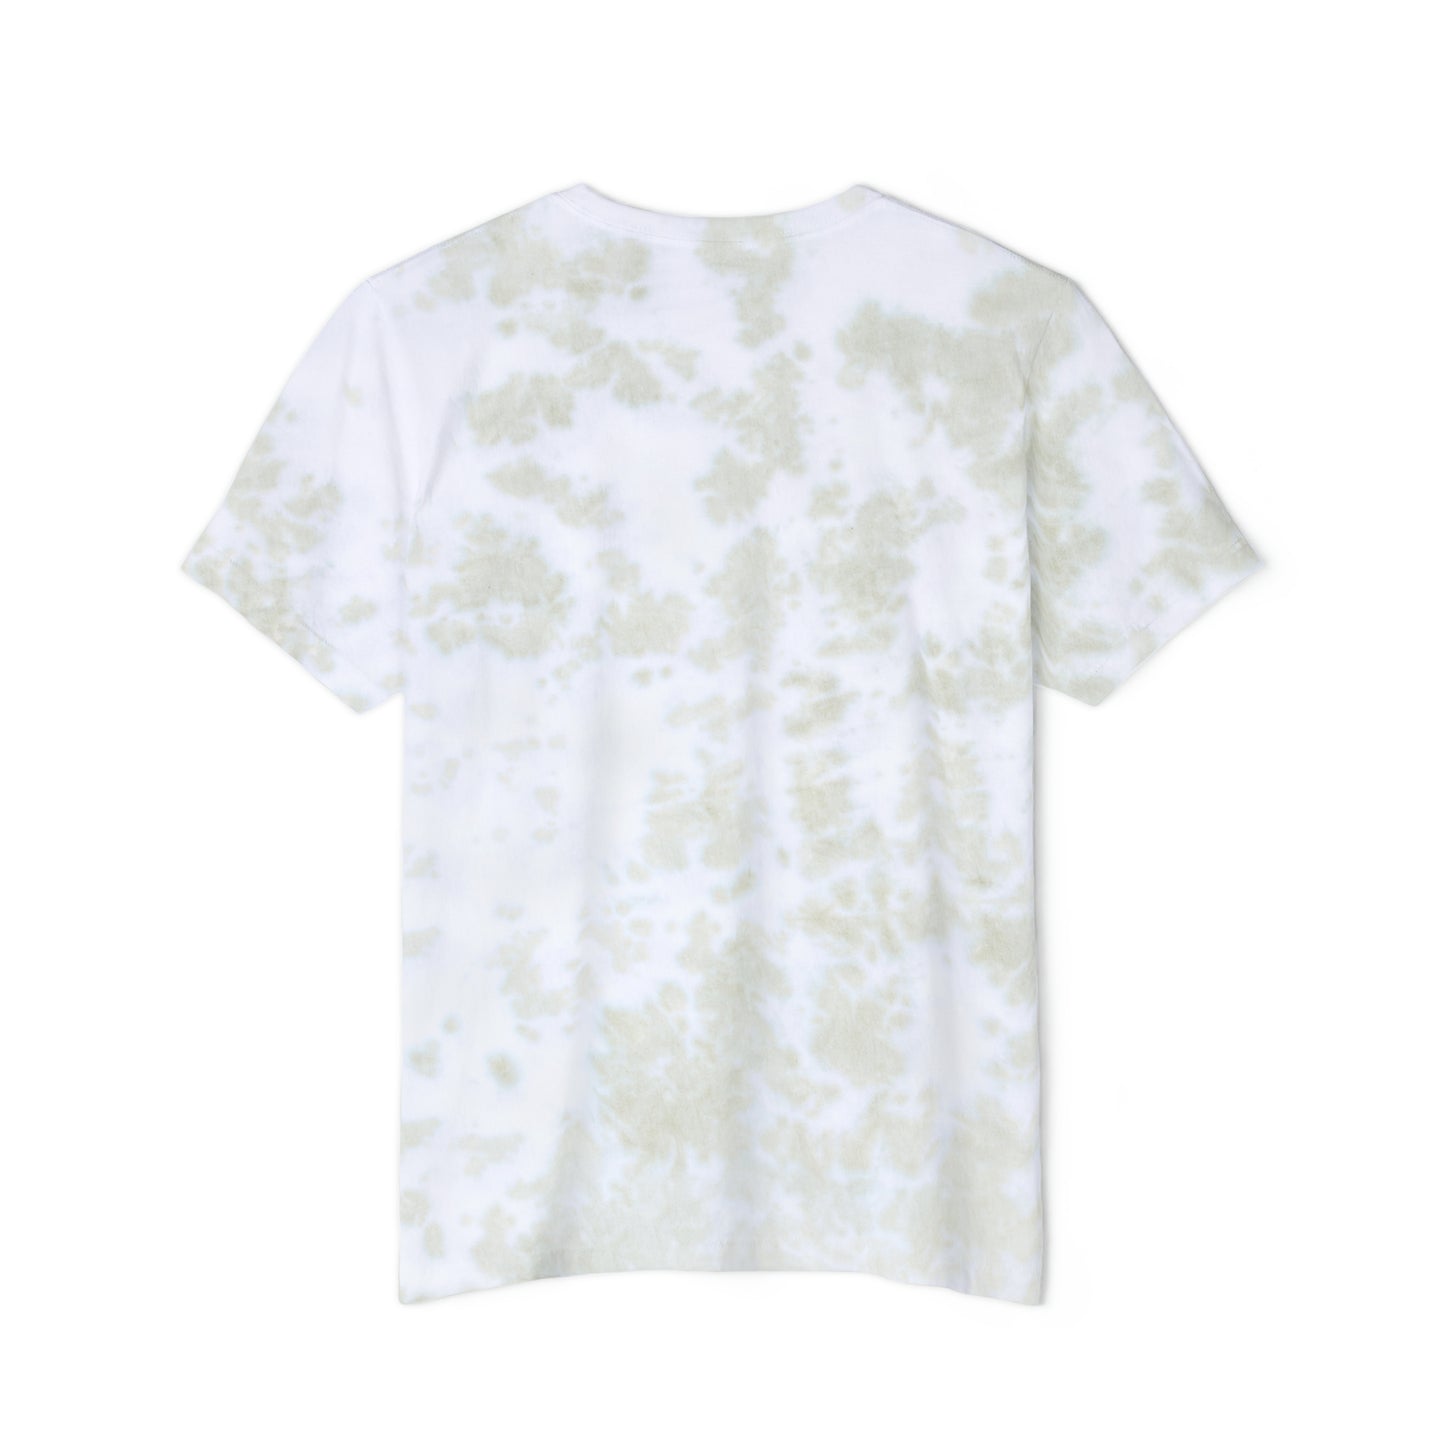 Weed is Bad Unisex FWD Fashion Tie-Dyed T-Shirt